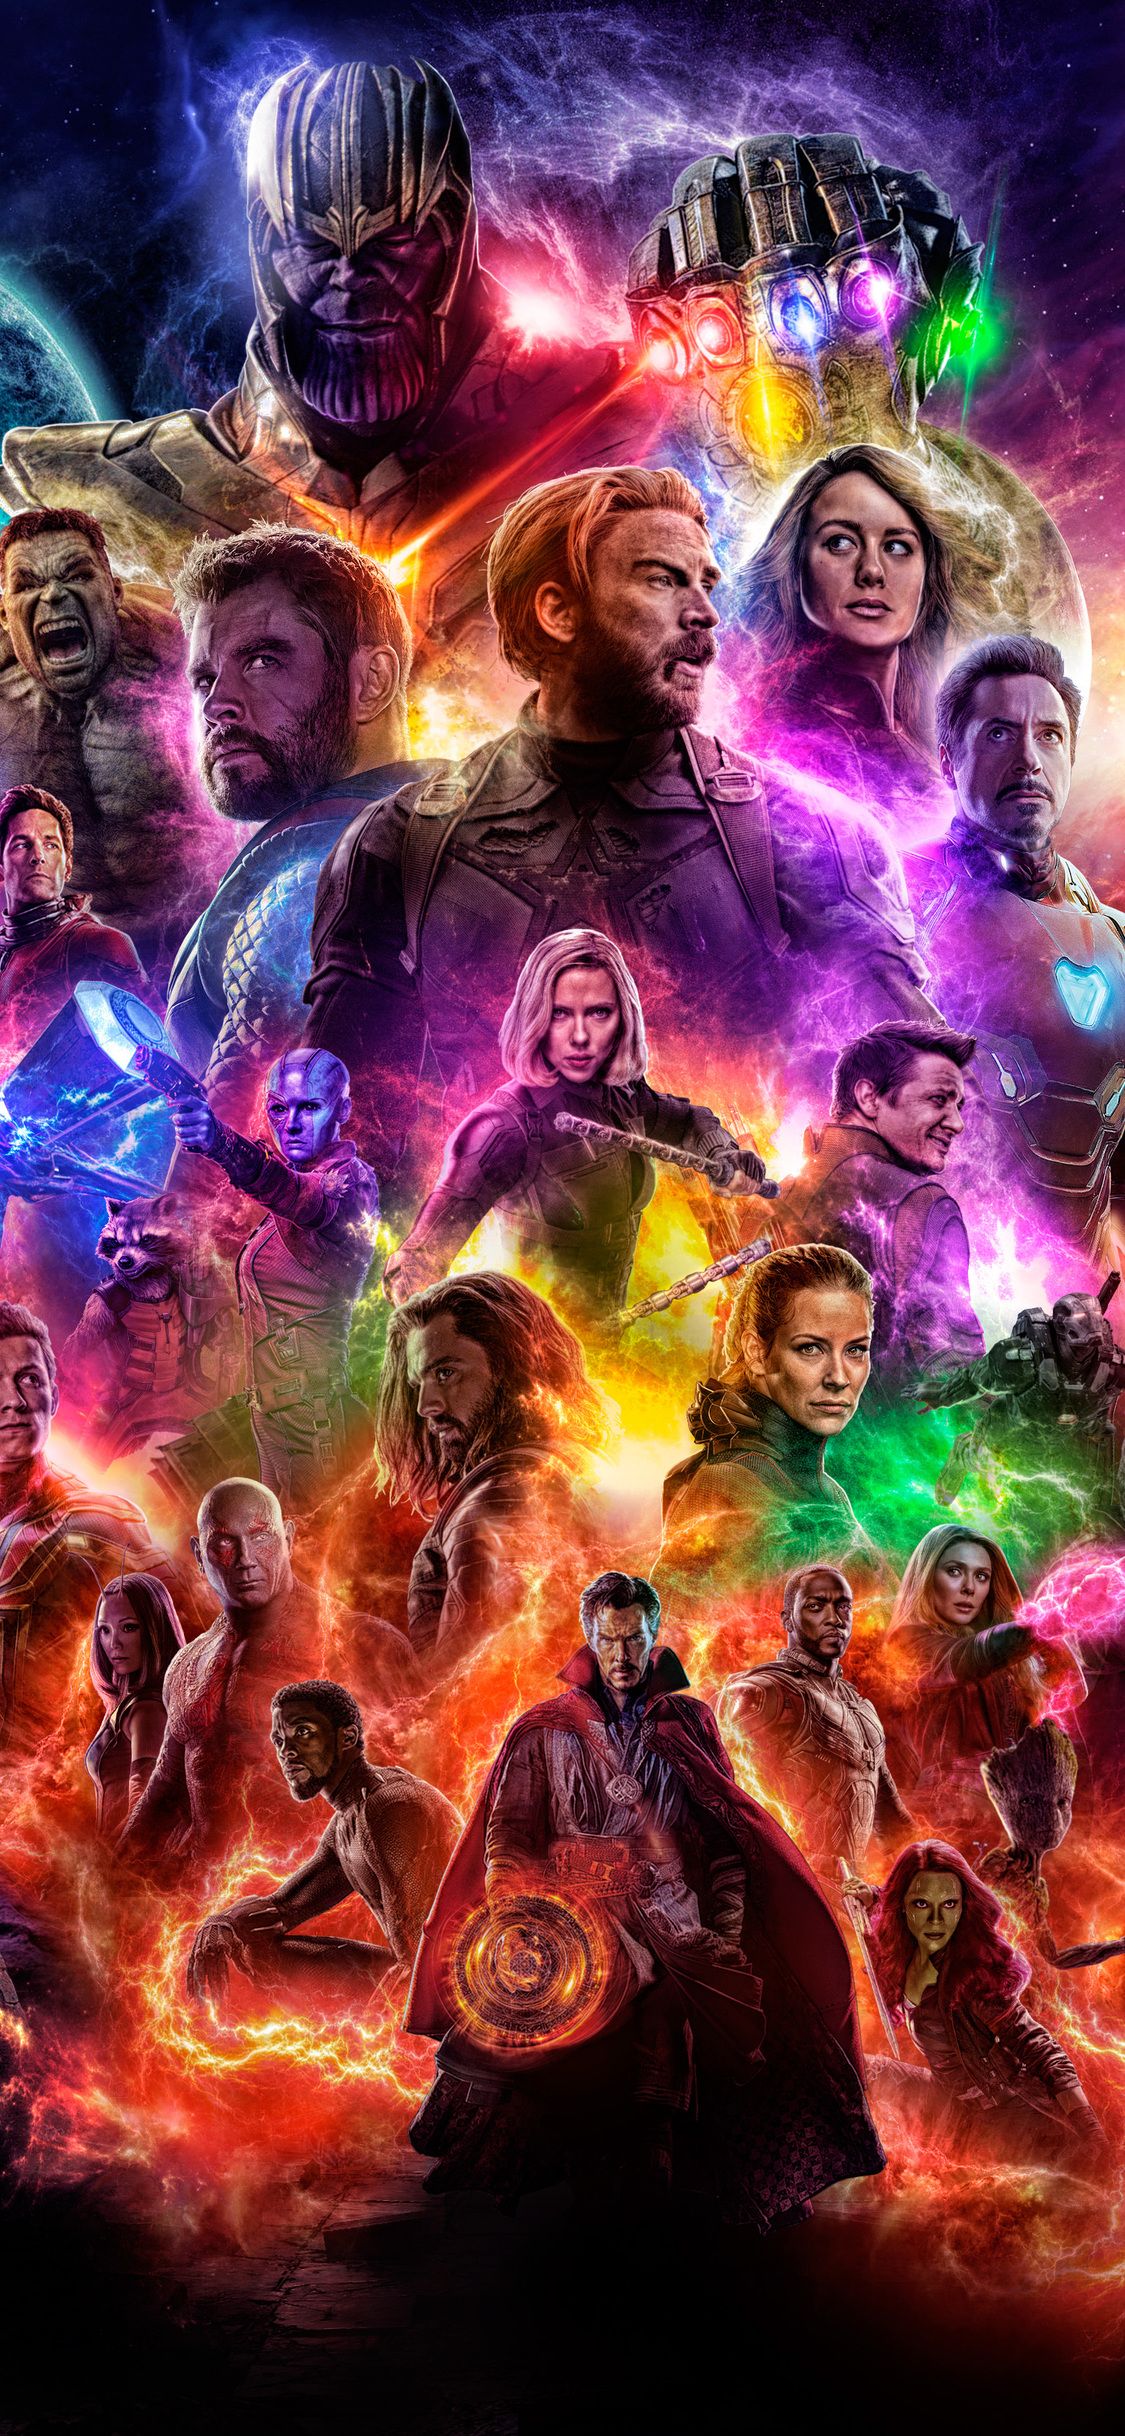 Avengers 4 End Game 2019 iPhone XS, iPhone iPhone X HD